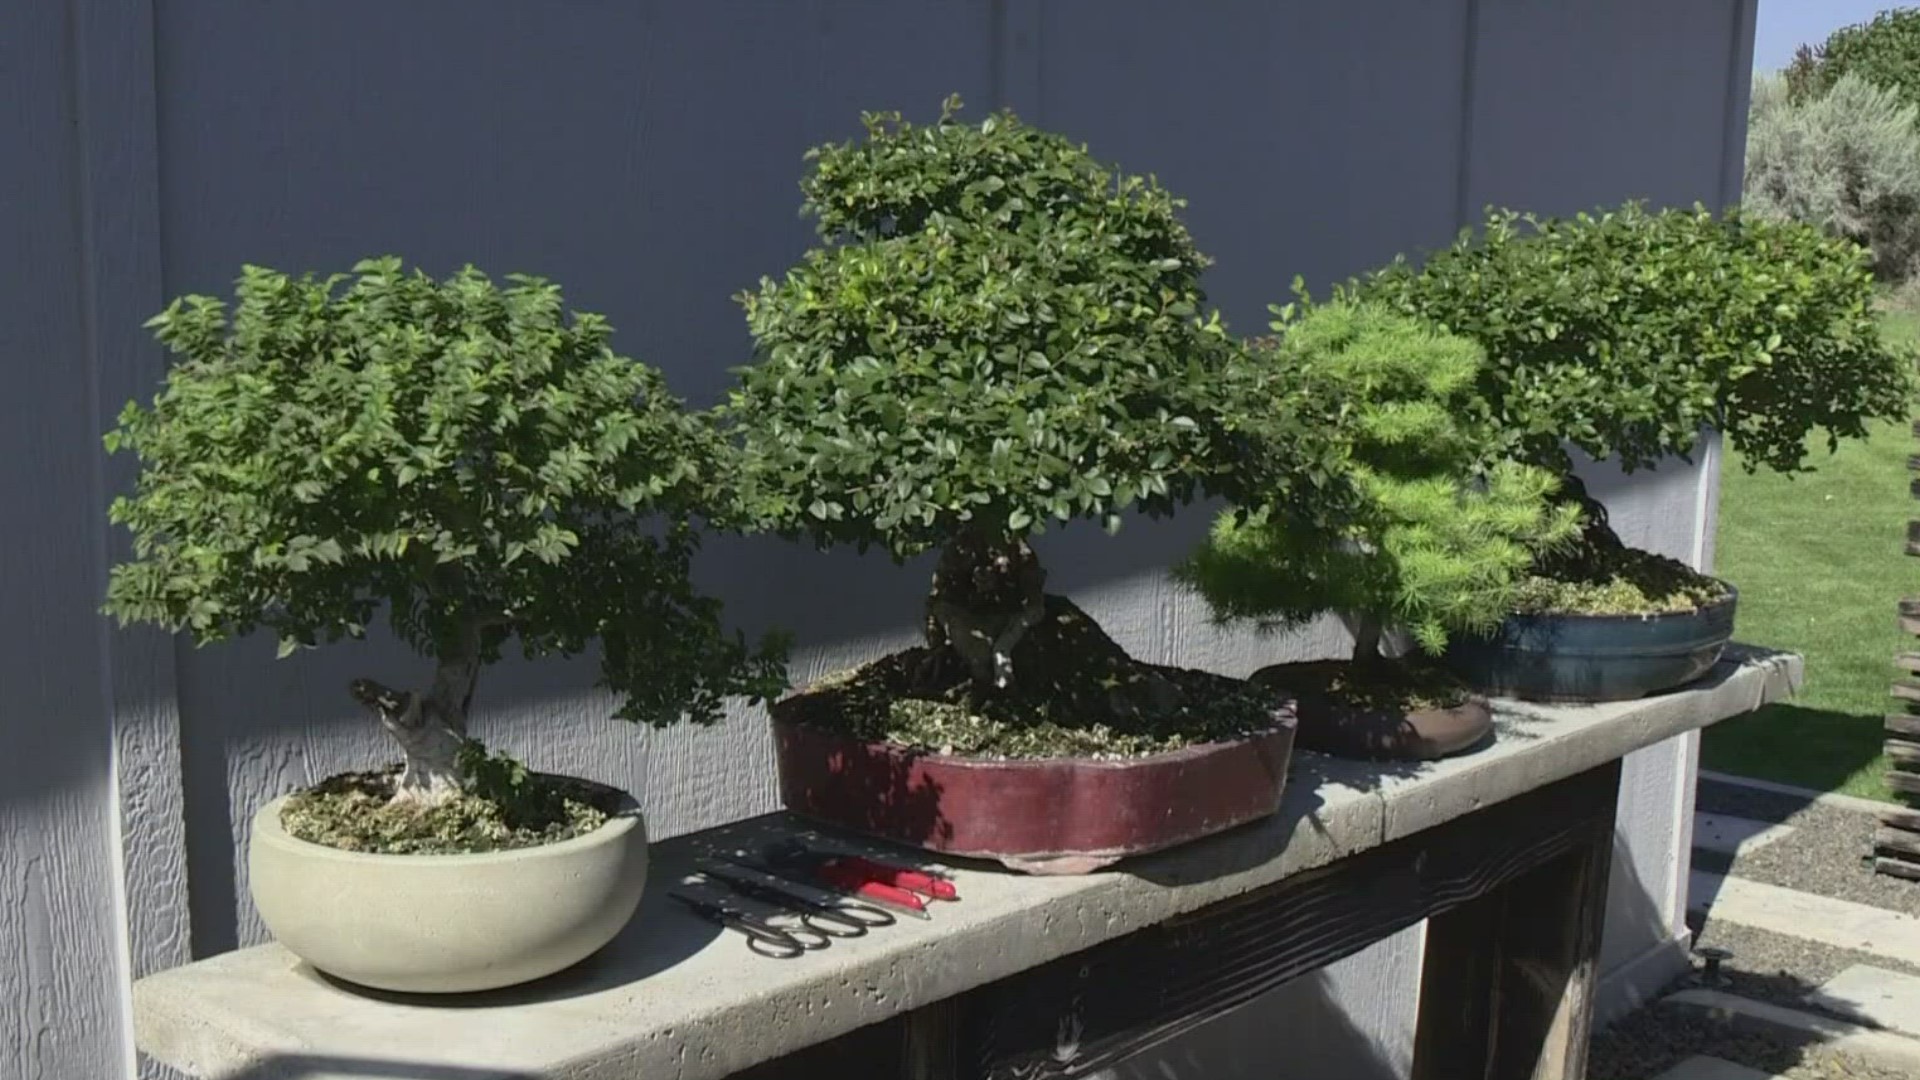 Would you like to combine your love of gardening with your artistic side? If so, then bonsai may be for you.